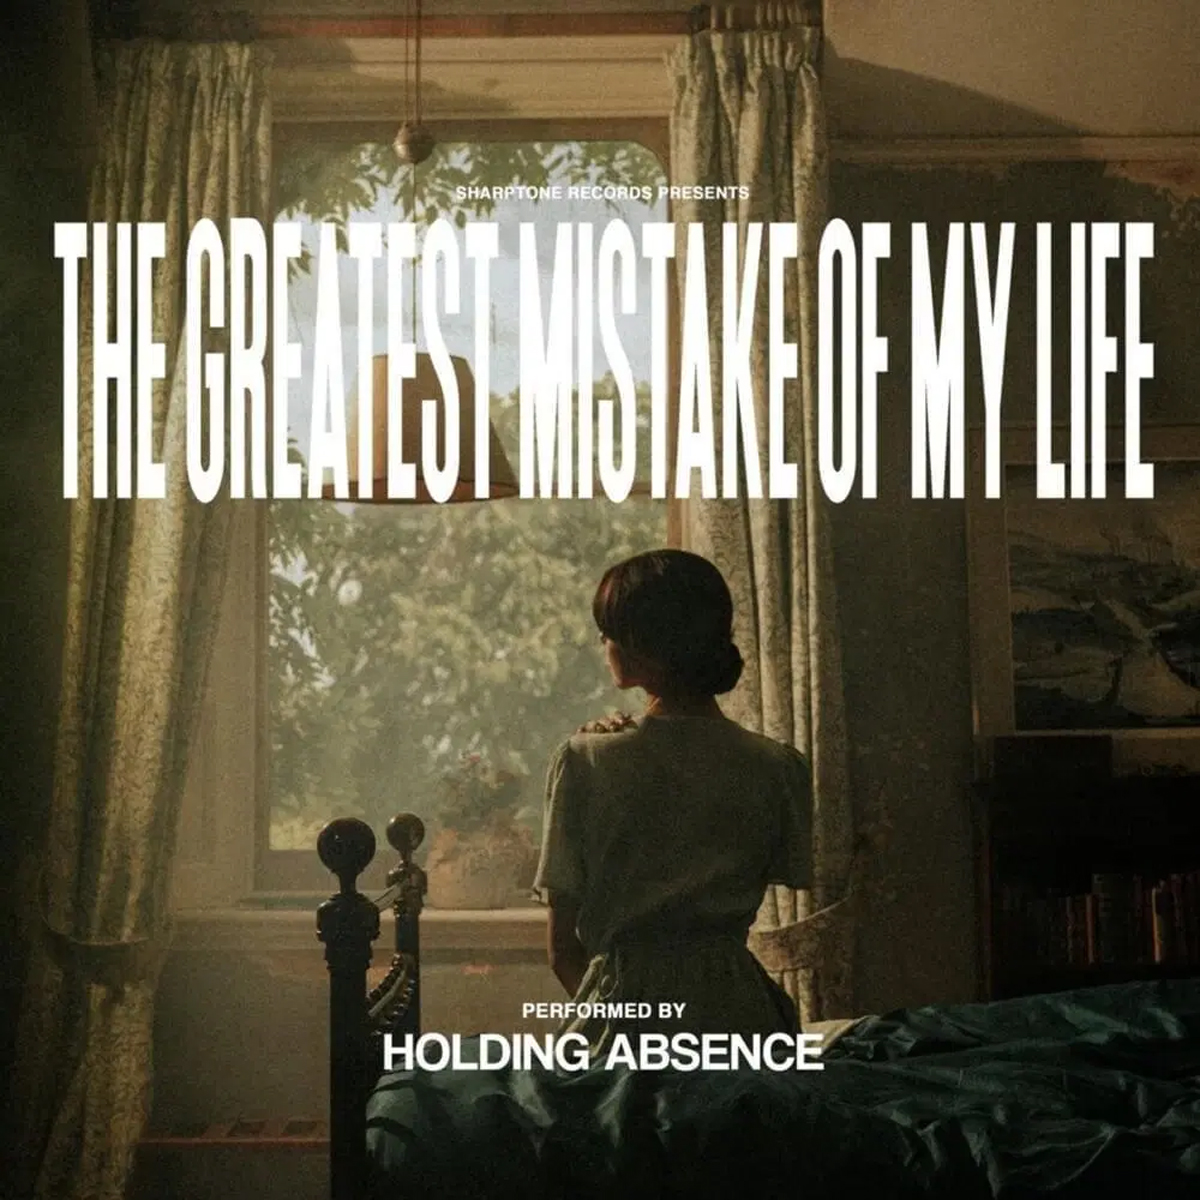 HOLDING ABSENCE - THE GREATEST MISTAKE OF MY LIFE